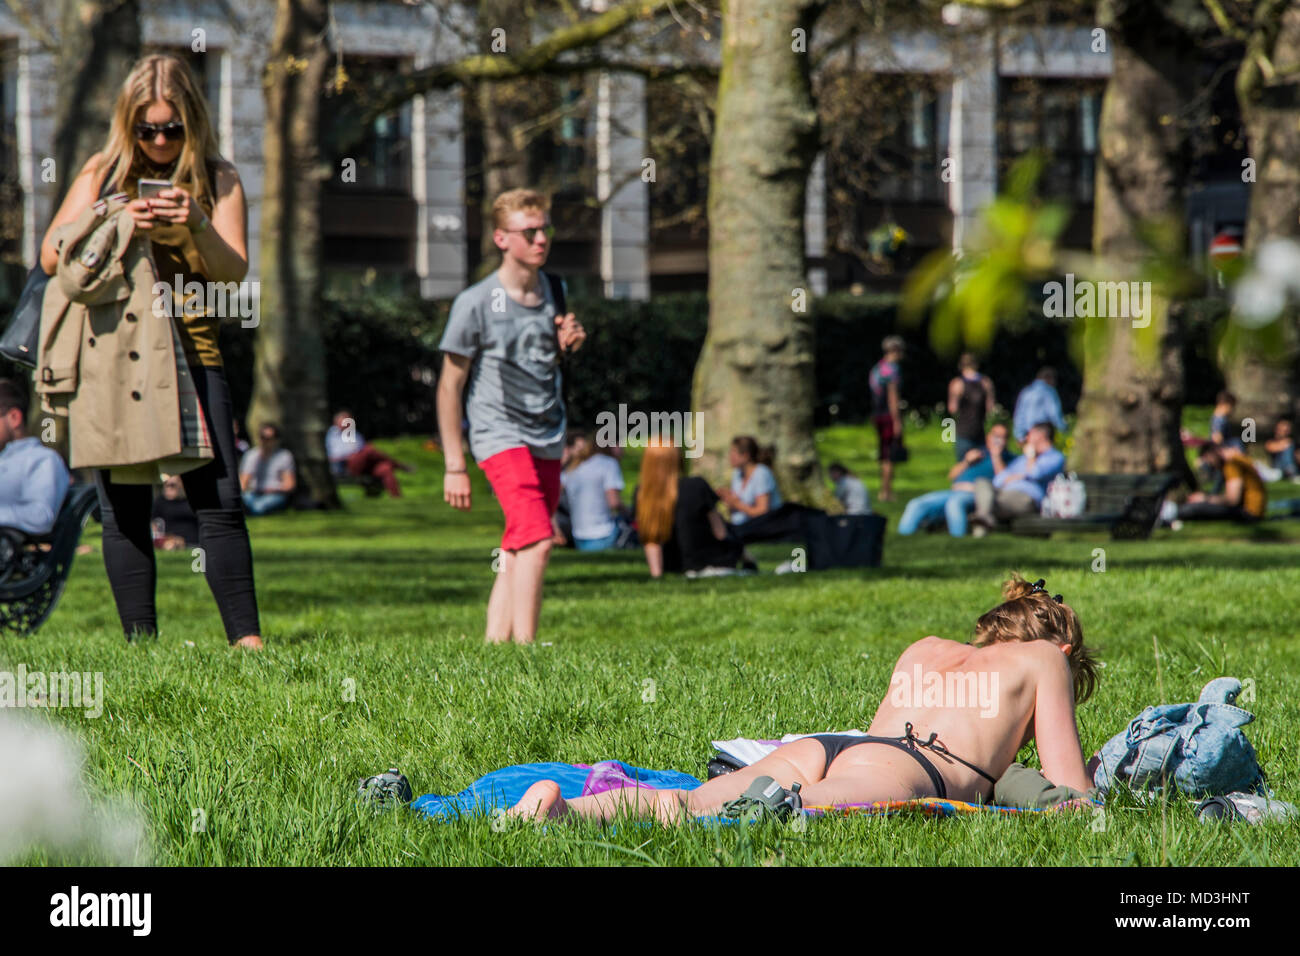 London, UK. 18th April 2018. The cherry blosom and sun provide a perfect excuse to strip off, relax, chat and take selfies - A sunny day in Green Park brings out tourists and office workers to enjoy the first truly hot day of the year. Credit: Guy Bell/Alamy Live News Stock Photo